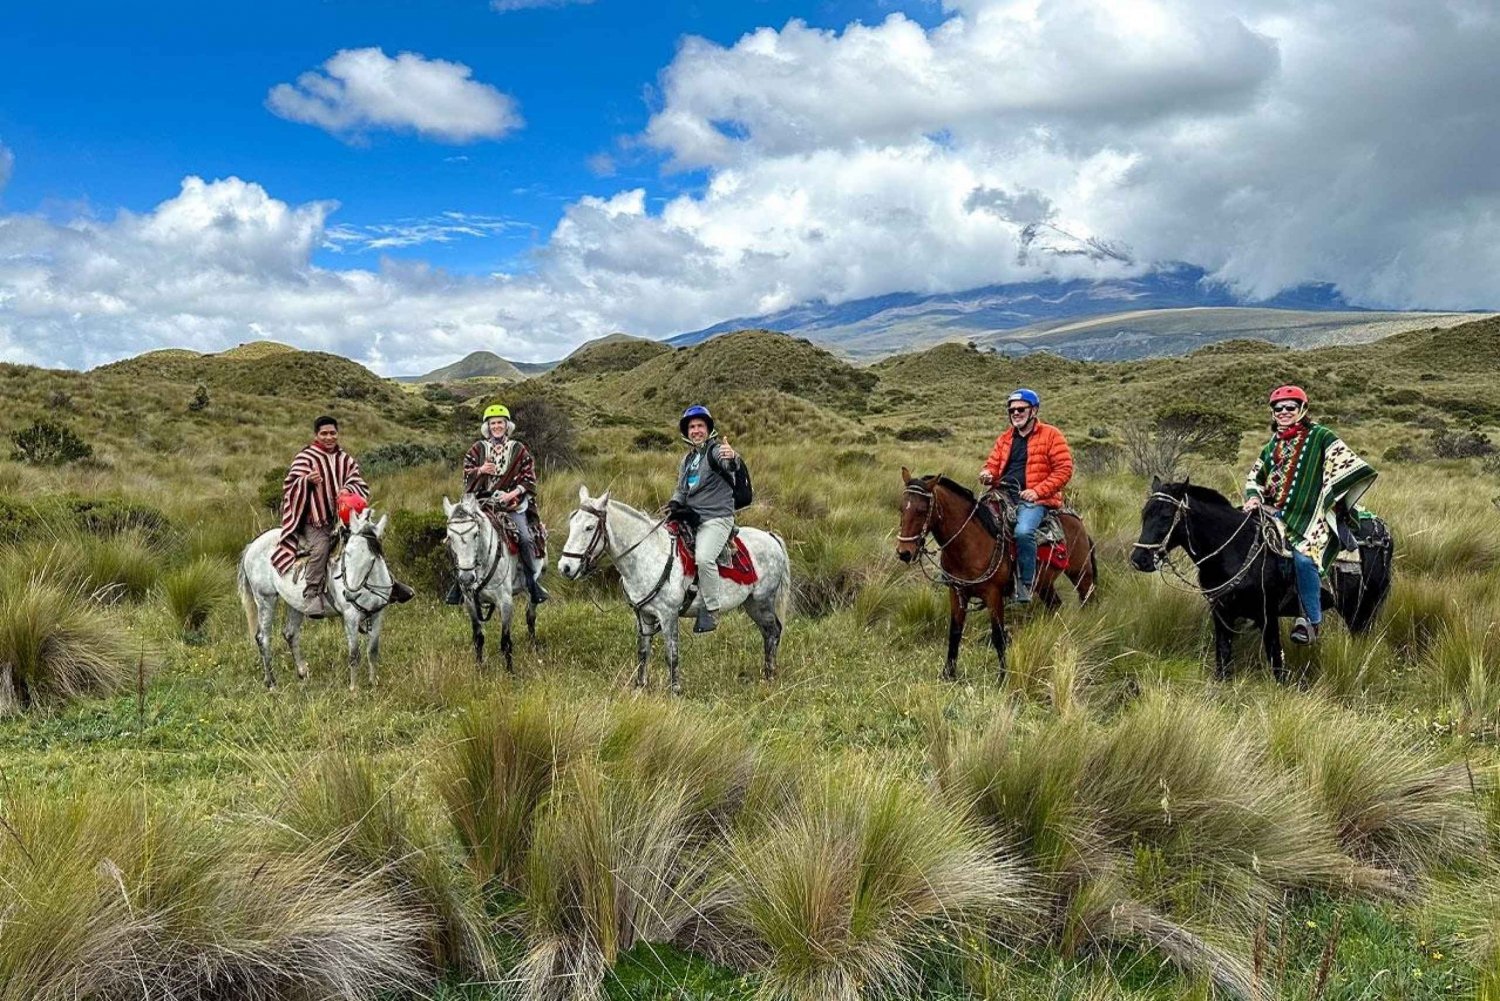 Horseback Riding in Cotopaxi all included